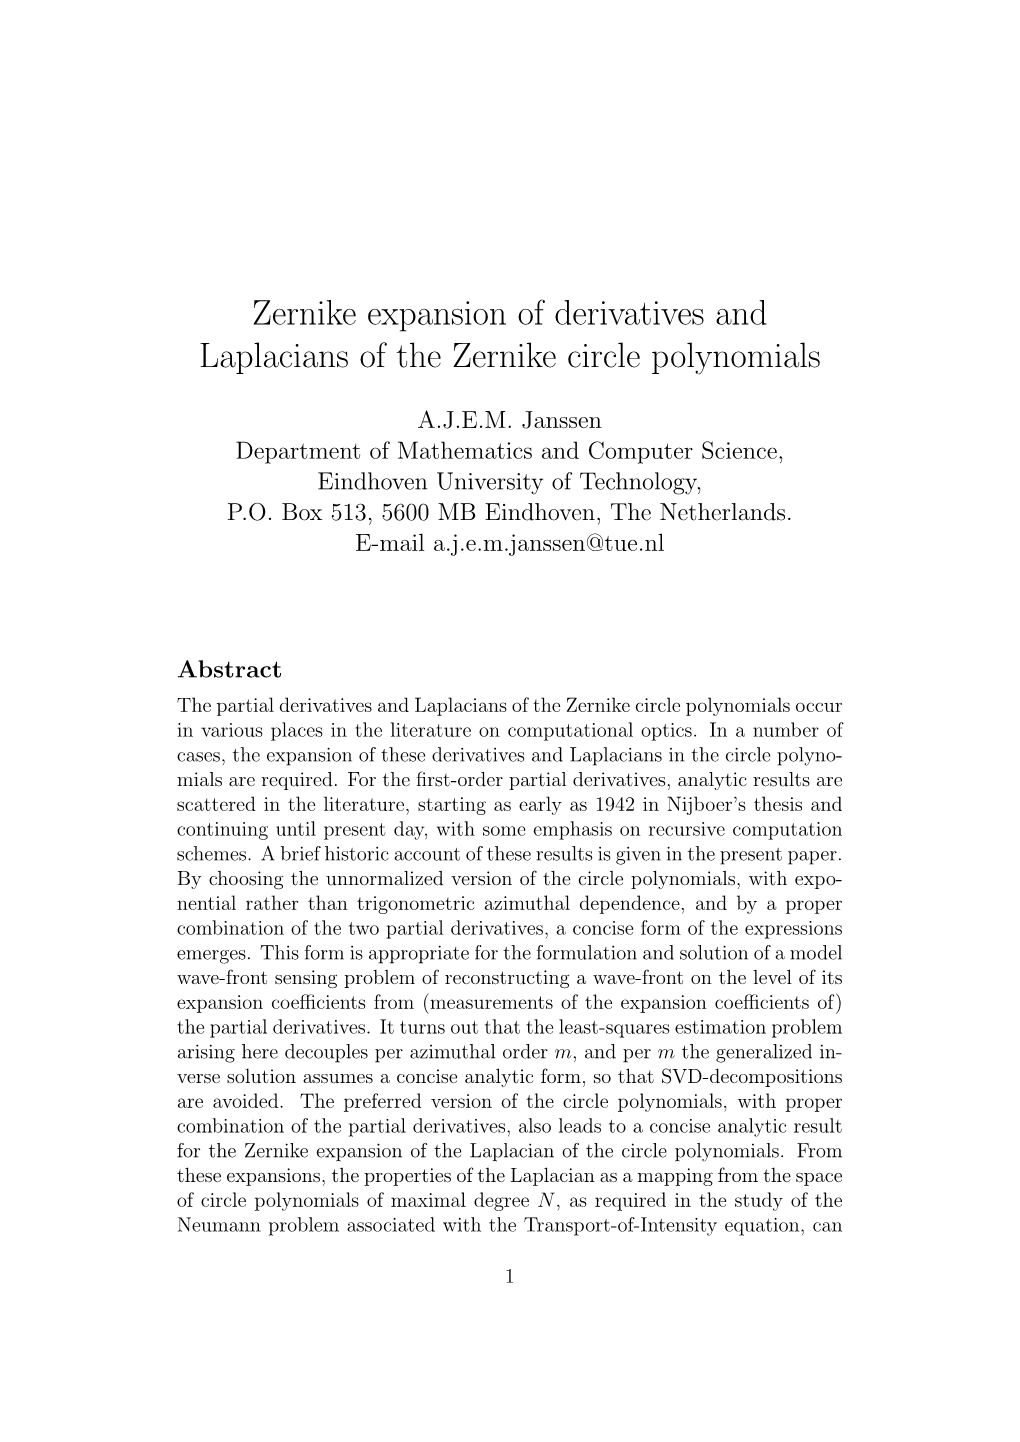 Zernike Expansion of Derivatives and Laplacians of the Zernike Circle Polynomials